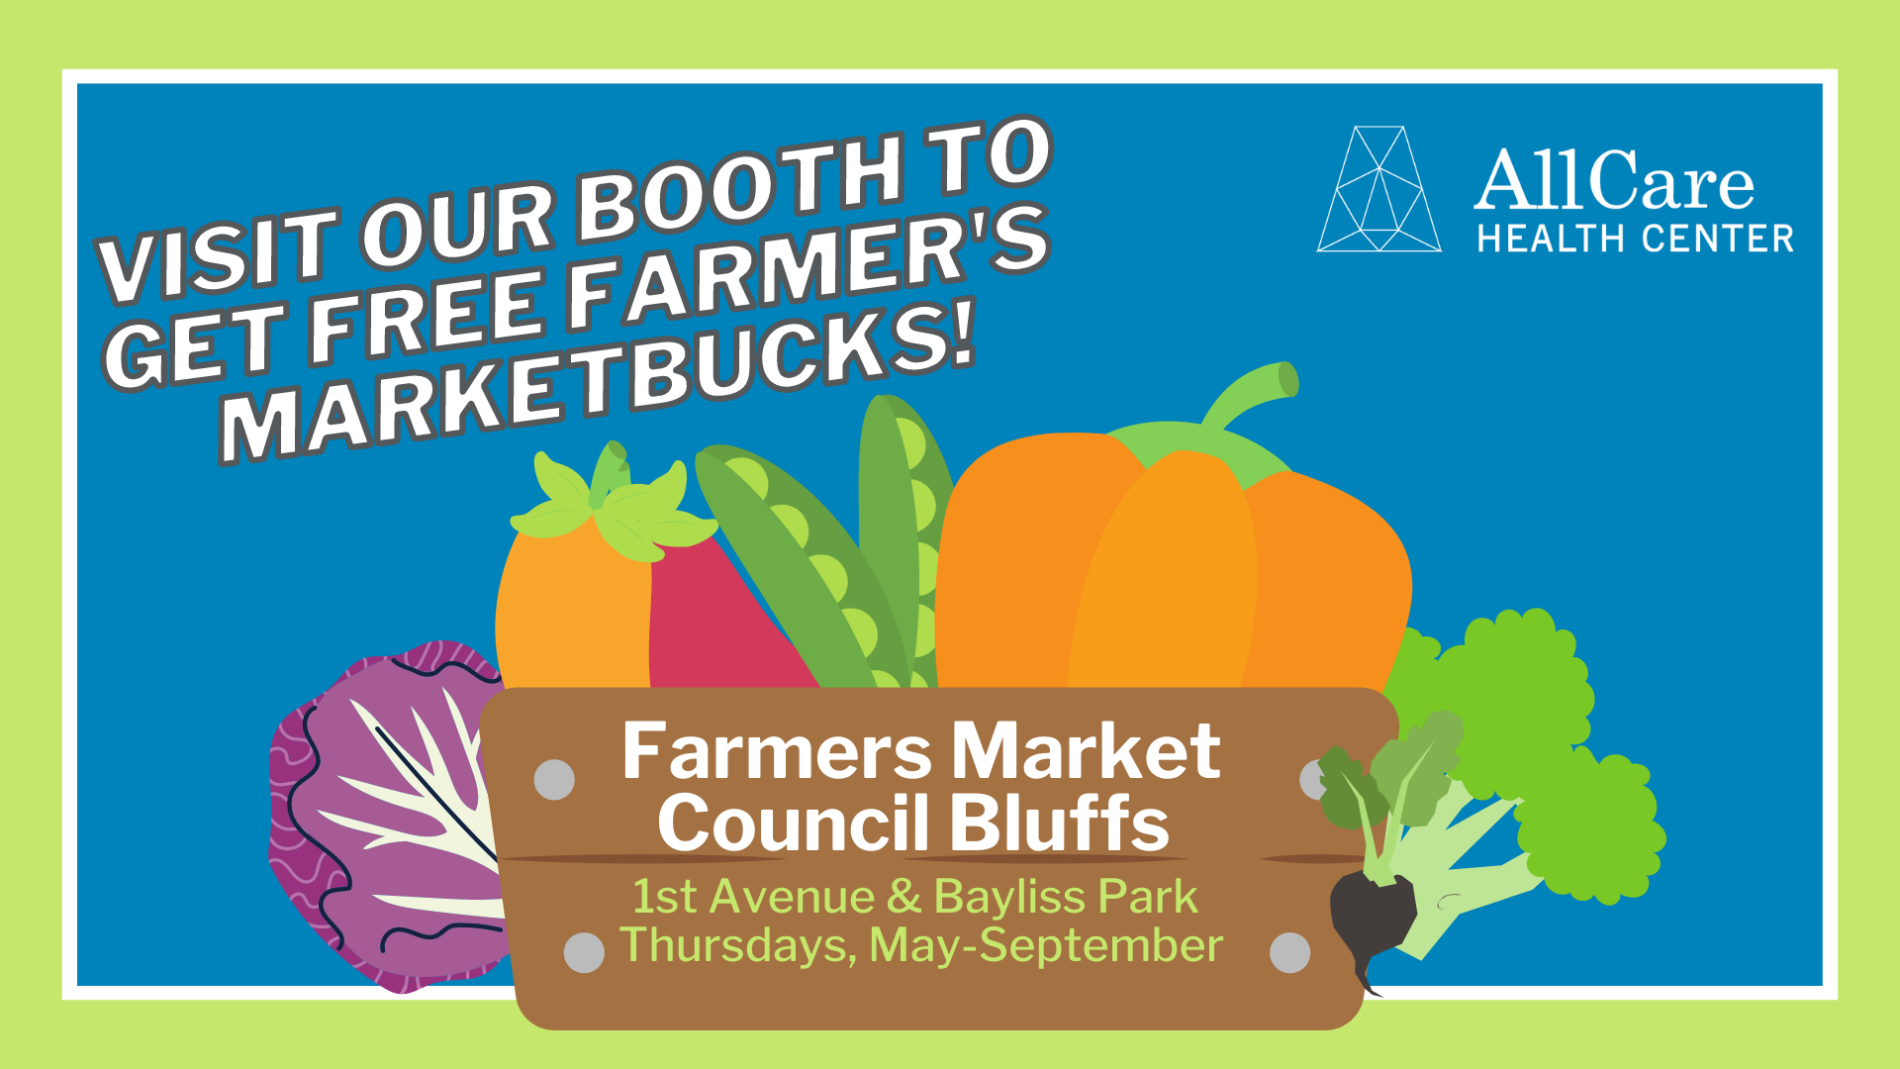 Come check out our weekly booth at the Farmers Market Council Bluffs!